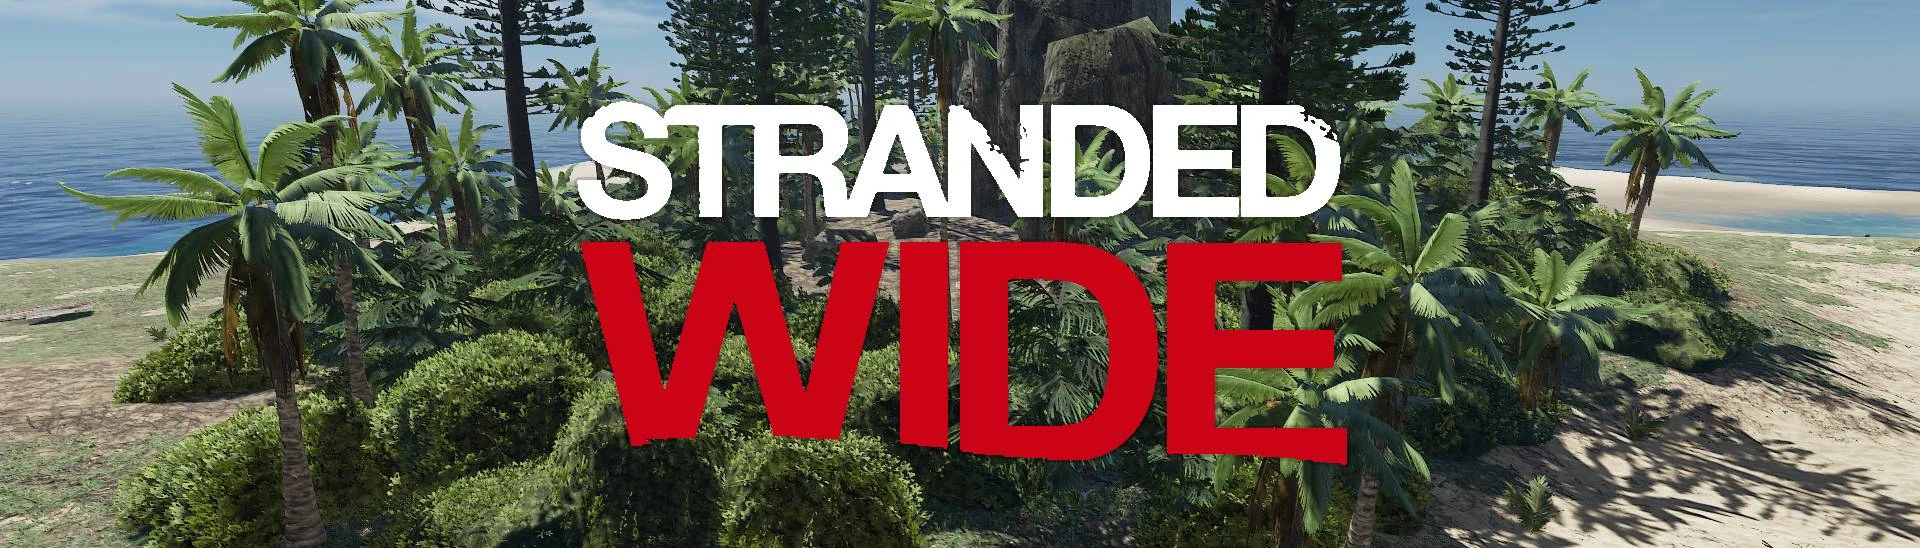 TROPICAL SURVIVAL - Stranded Deep - Part 1 (Multiplayer) 